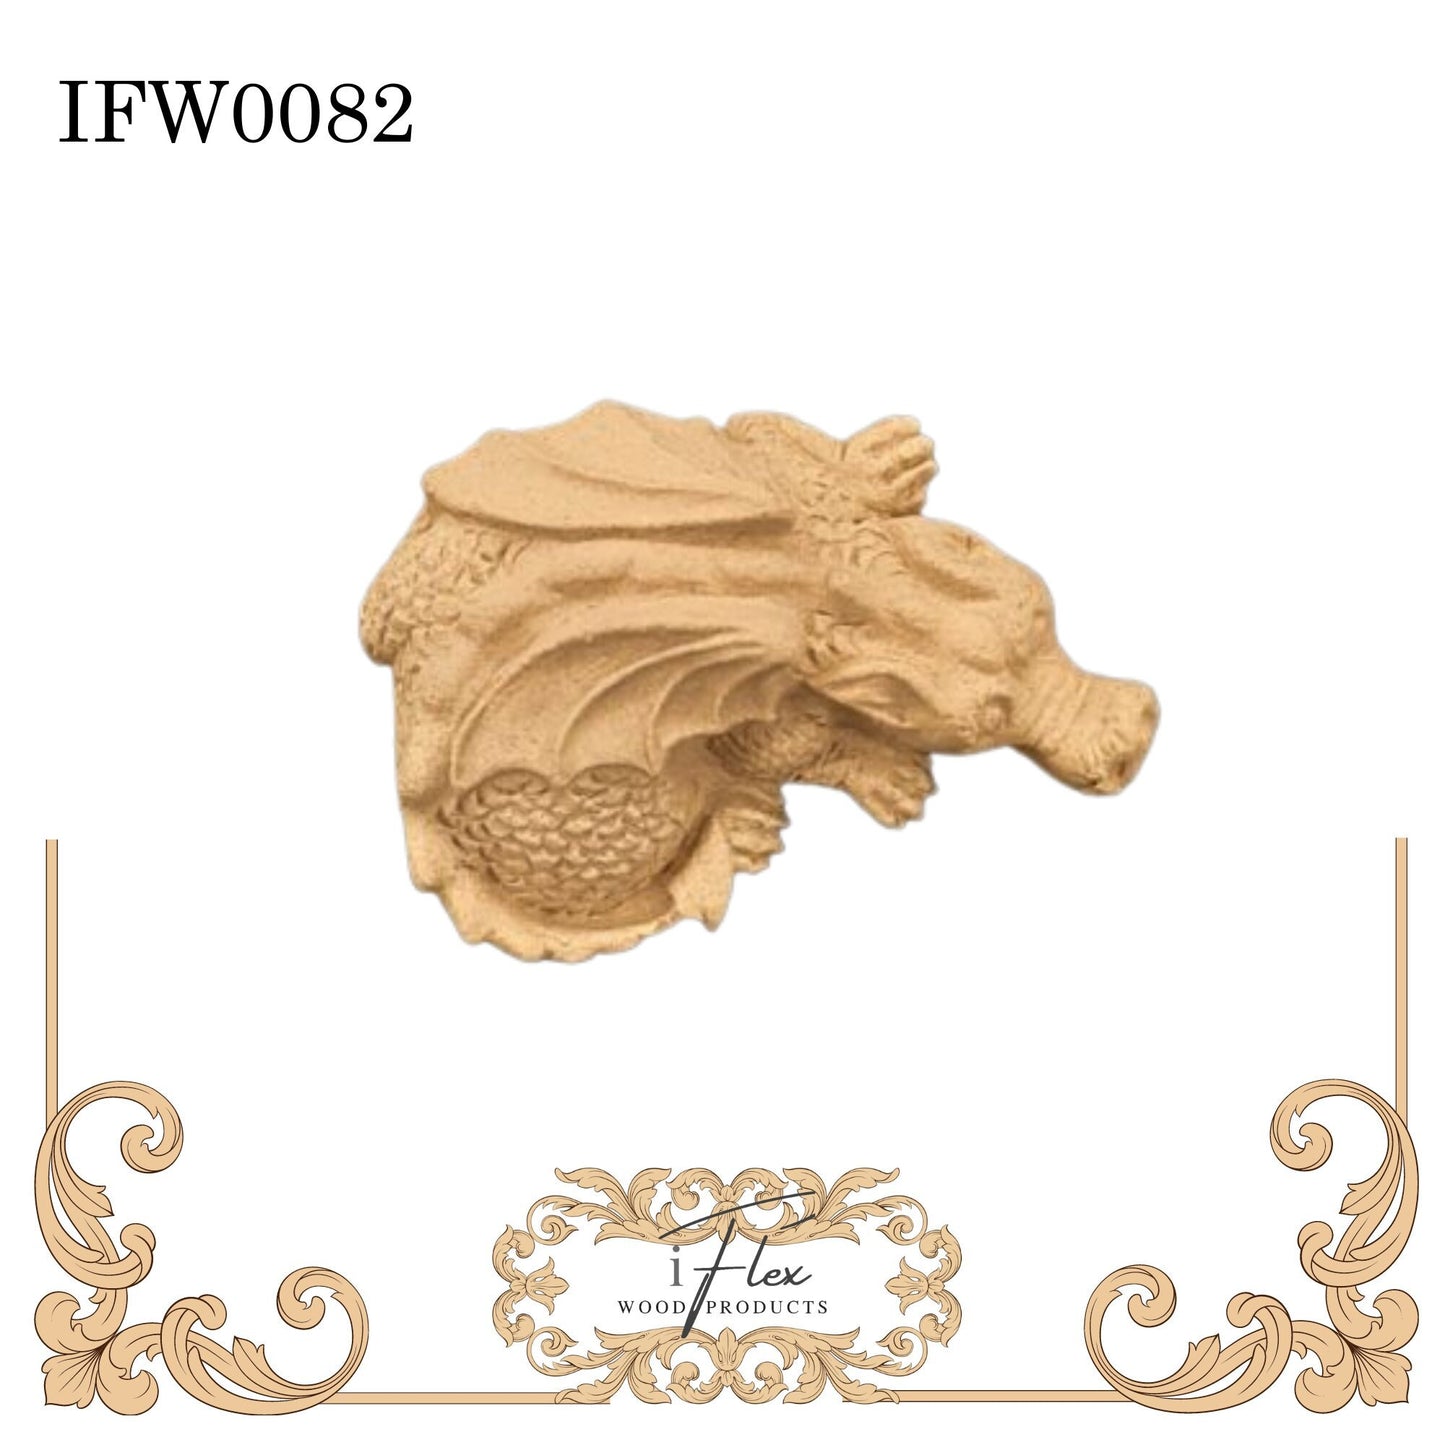 IFW 0082 iFlex Wood Products Dragon, Animal bendable mouldings, flexible, wooden appliques